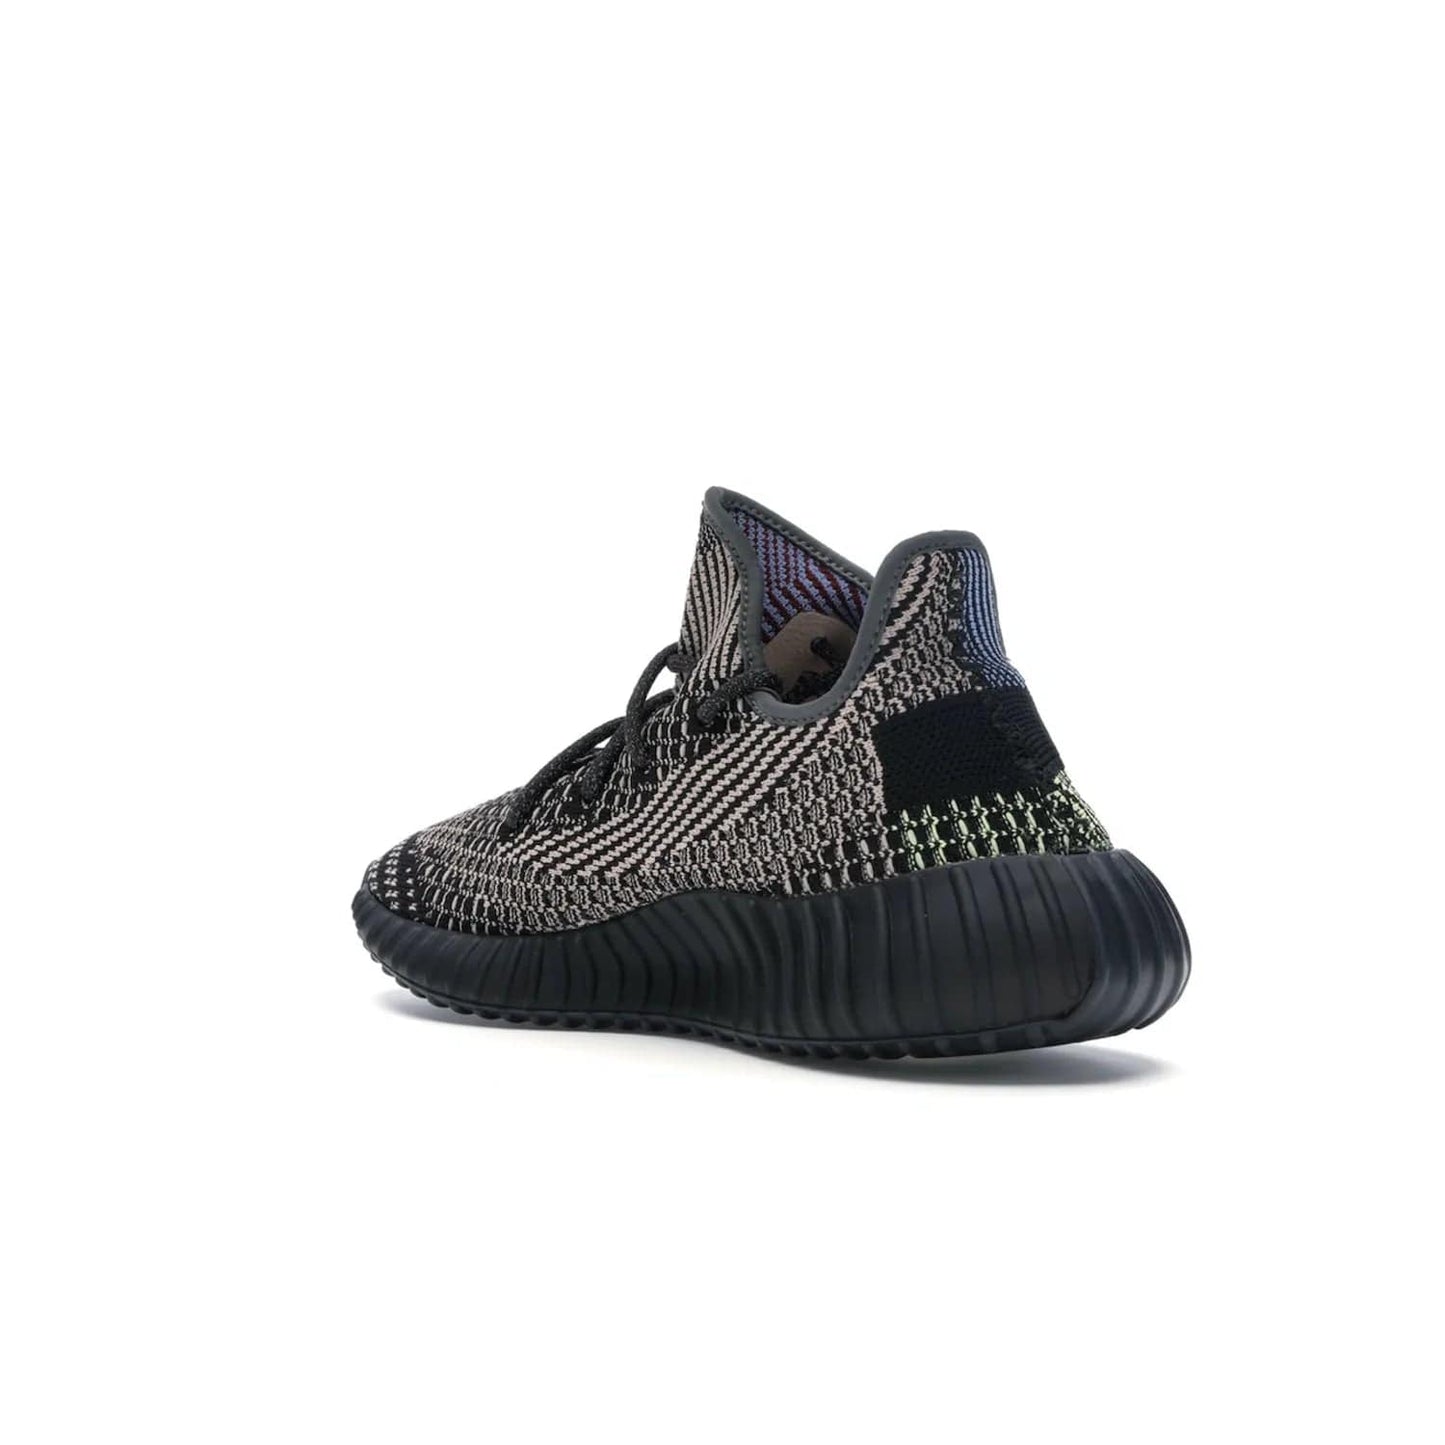 adidas Yeezy Boost 350 V2 Yecheil (Non-Reflective) - Image 24 - Only at www.BallersClubKickz.com - Make a statement with the eye-catching adidas Yeezy Boost 350 V2 Yecheil Non-Reflective. Featuring a spectrum of colorful hues, black upper, Boost cushioning, and black side stripe, the sneaker brings a luxe yet playful finish to any outfit.